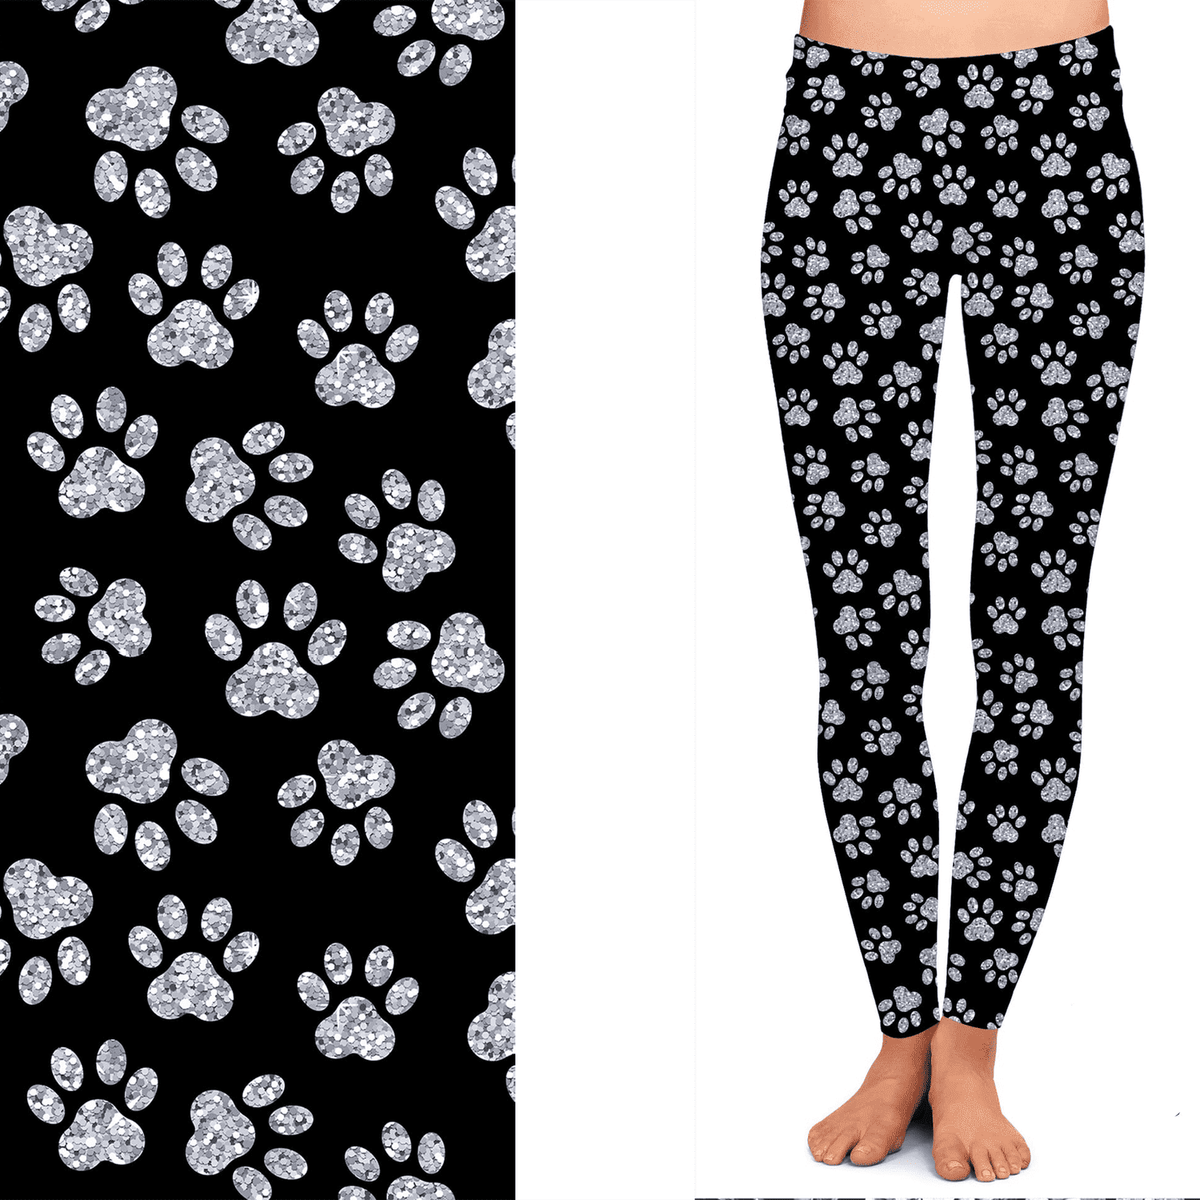 Faux Glitter Paw Leggings with Pockets Design